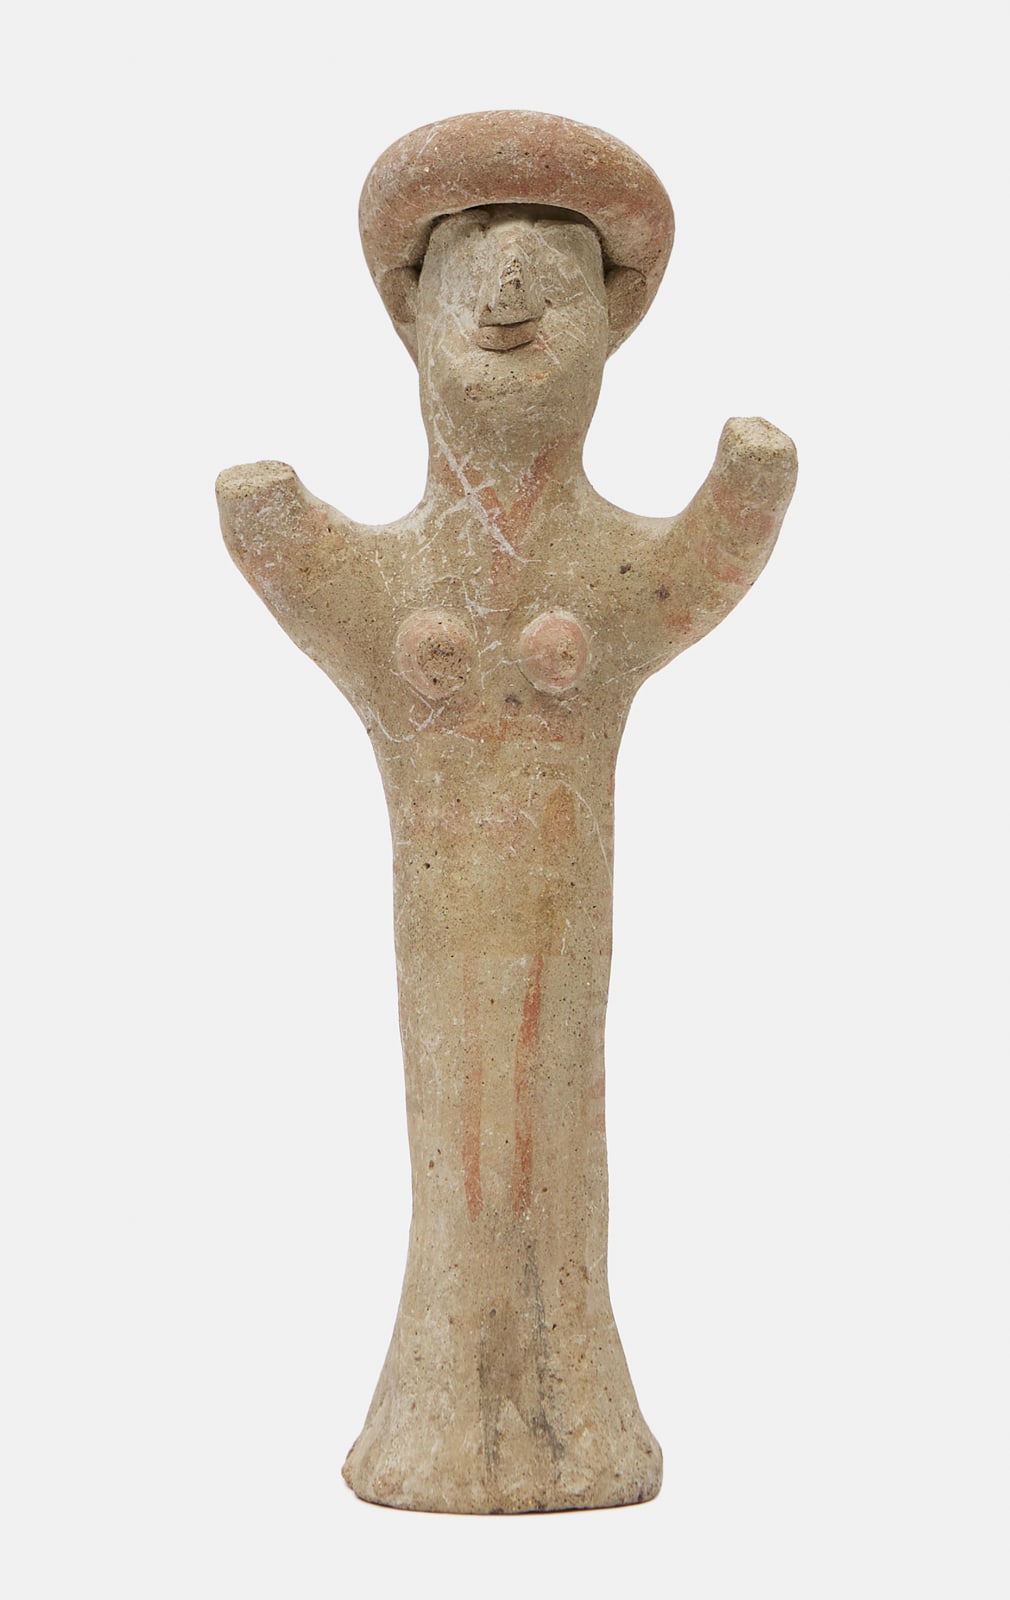 Anon, A Cypriot figure of a Goddess, 7th Century BC